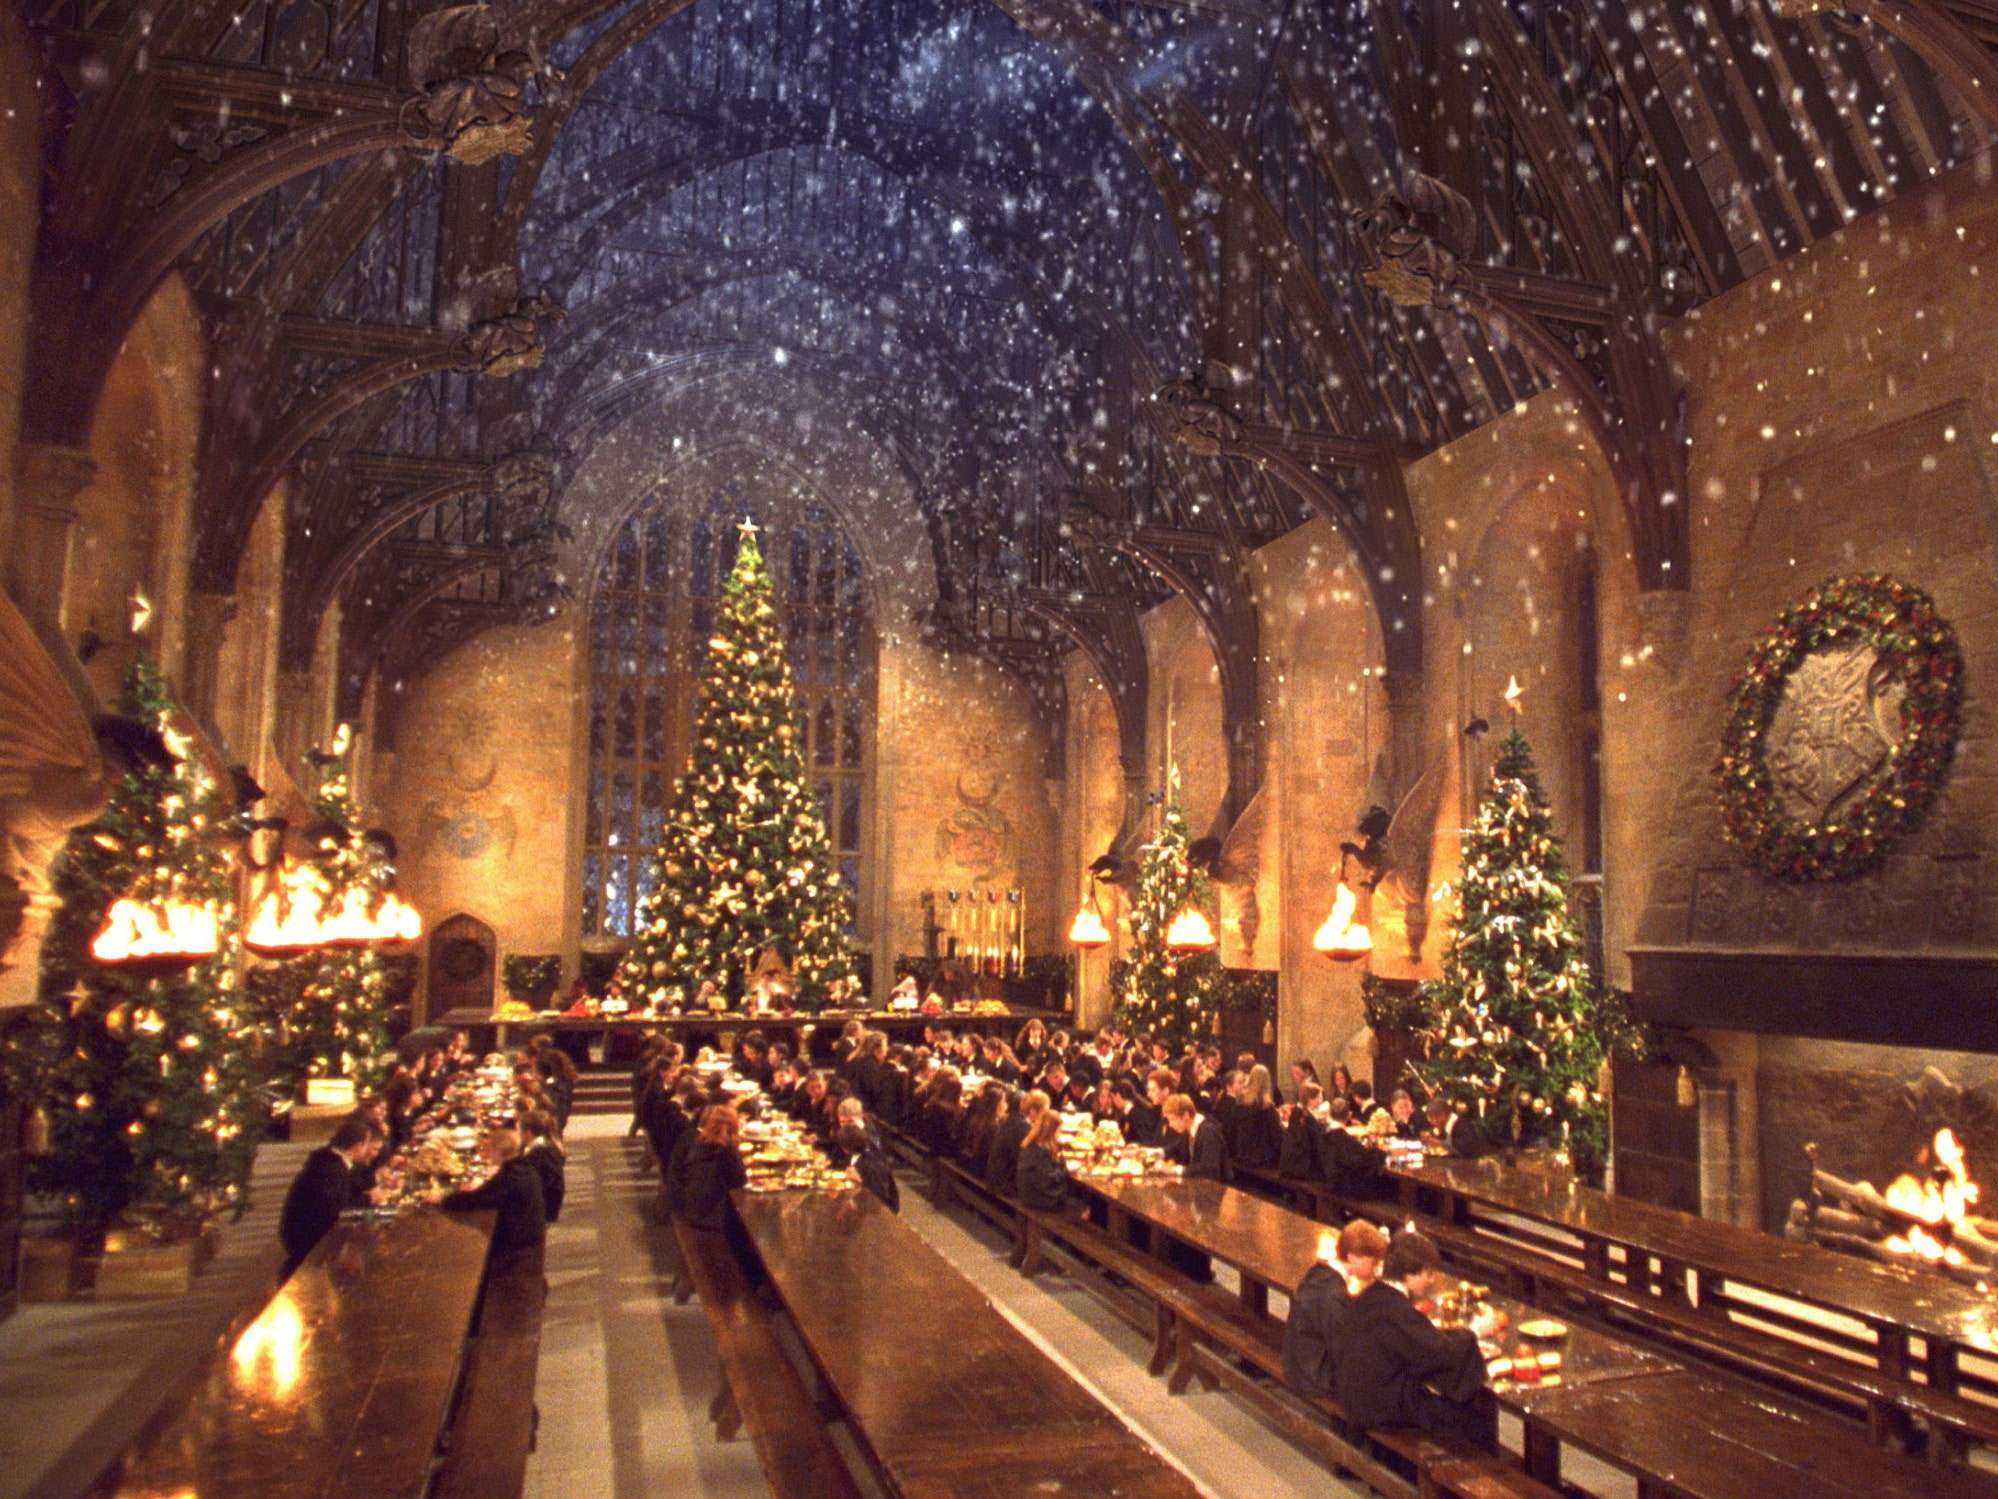 Have a Candlelit Christmas Dinner at Harry Potter